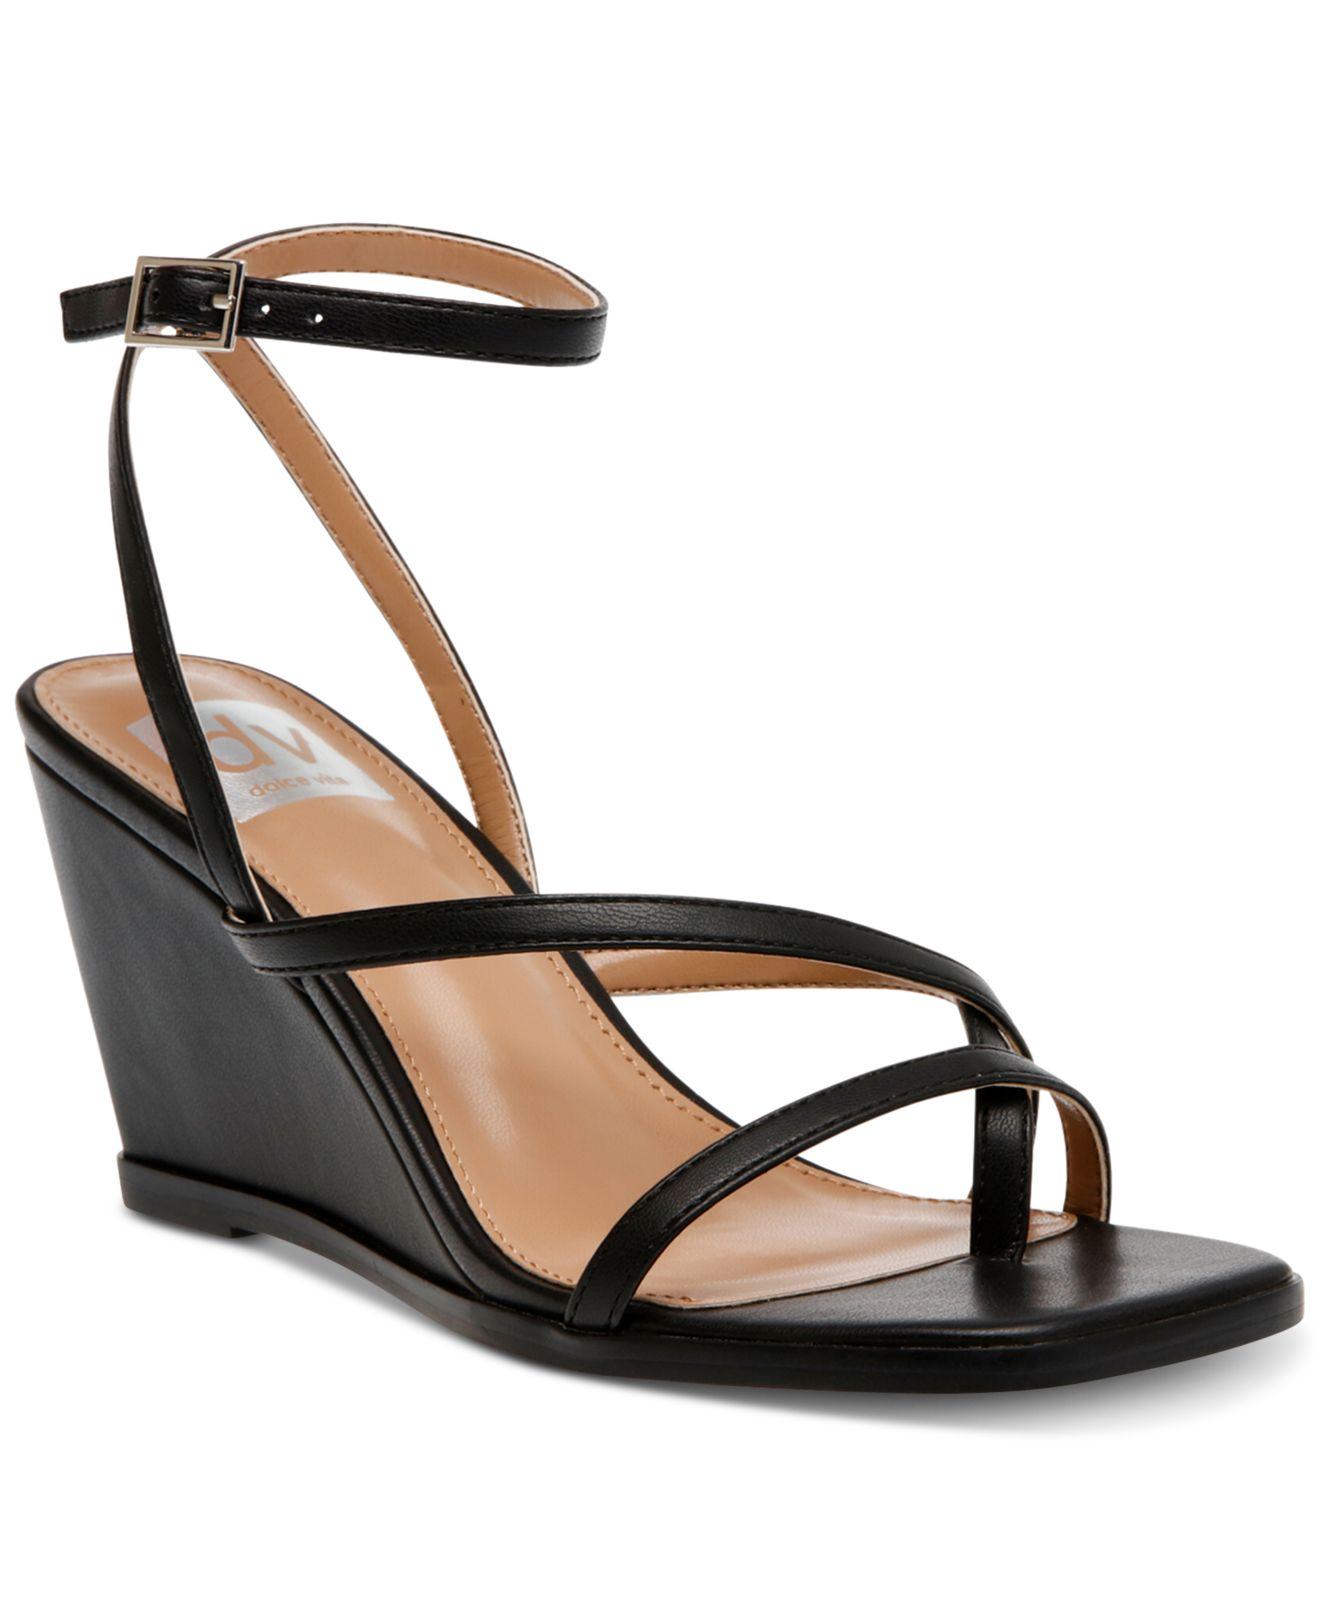 DV by Dolce Vita Eddle Strappy Wedge Sandals in Black | Lyst